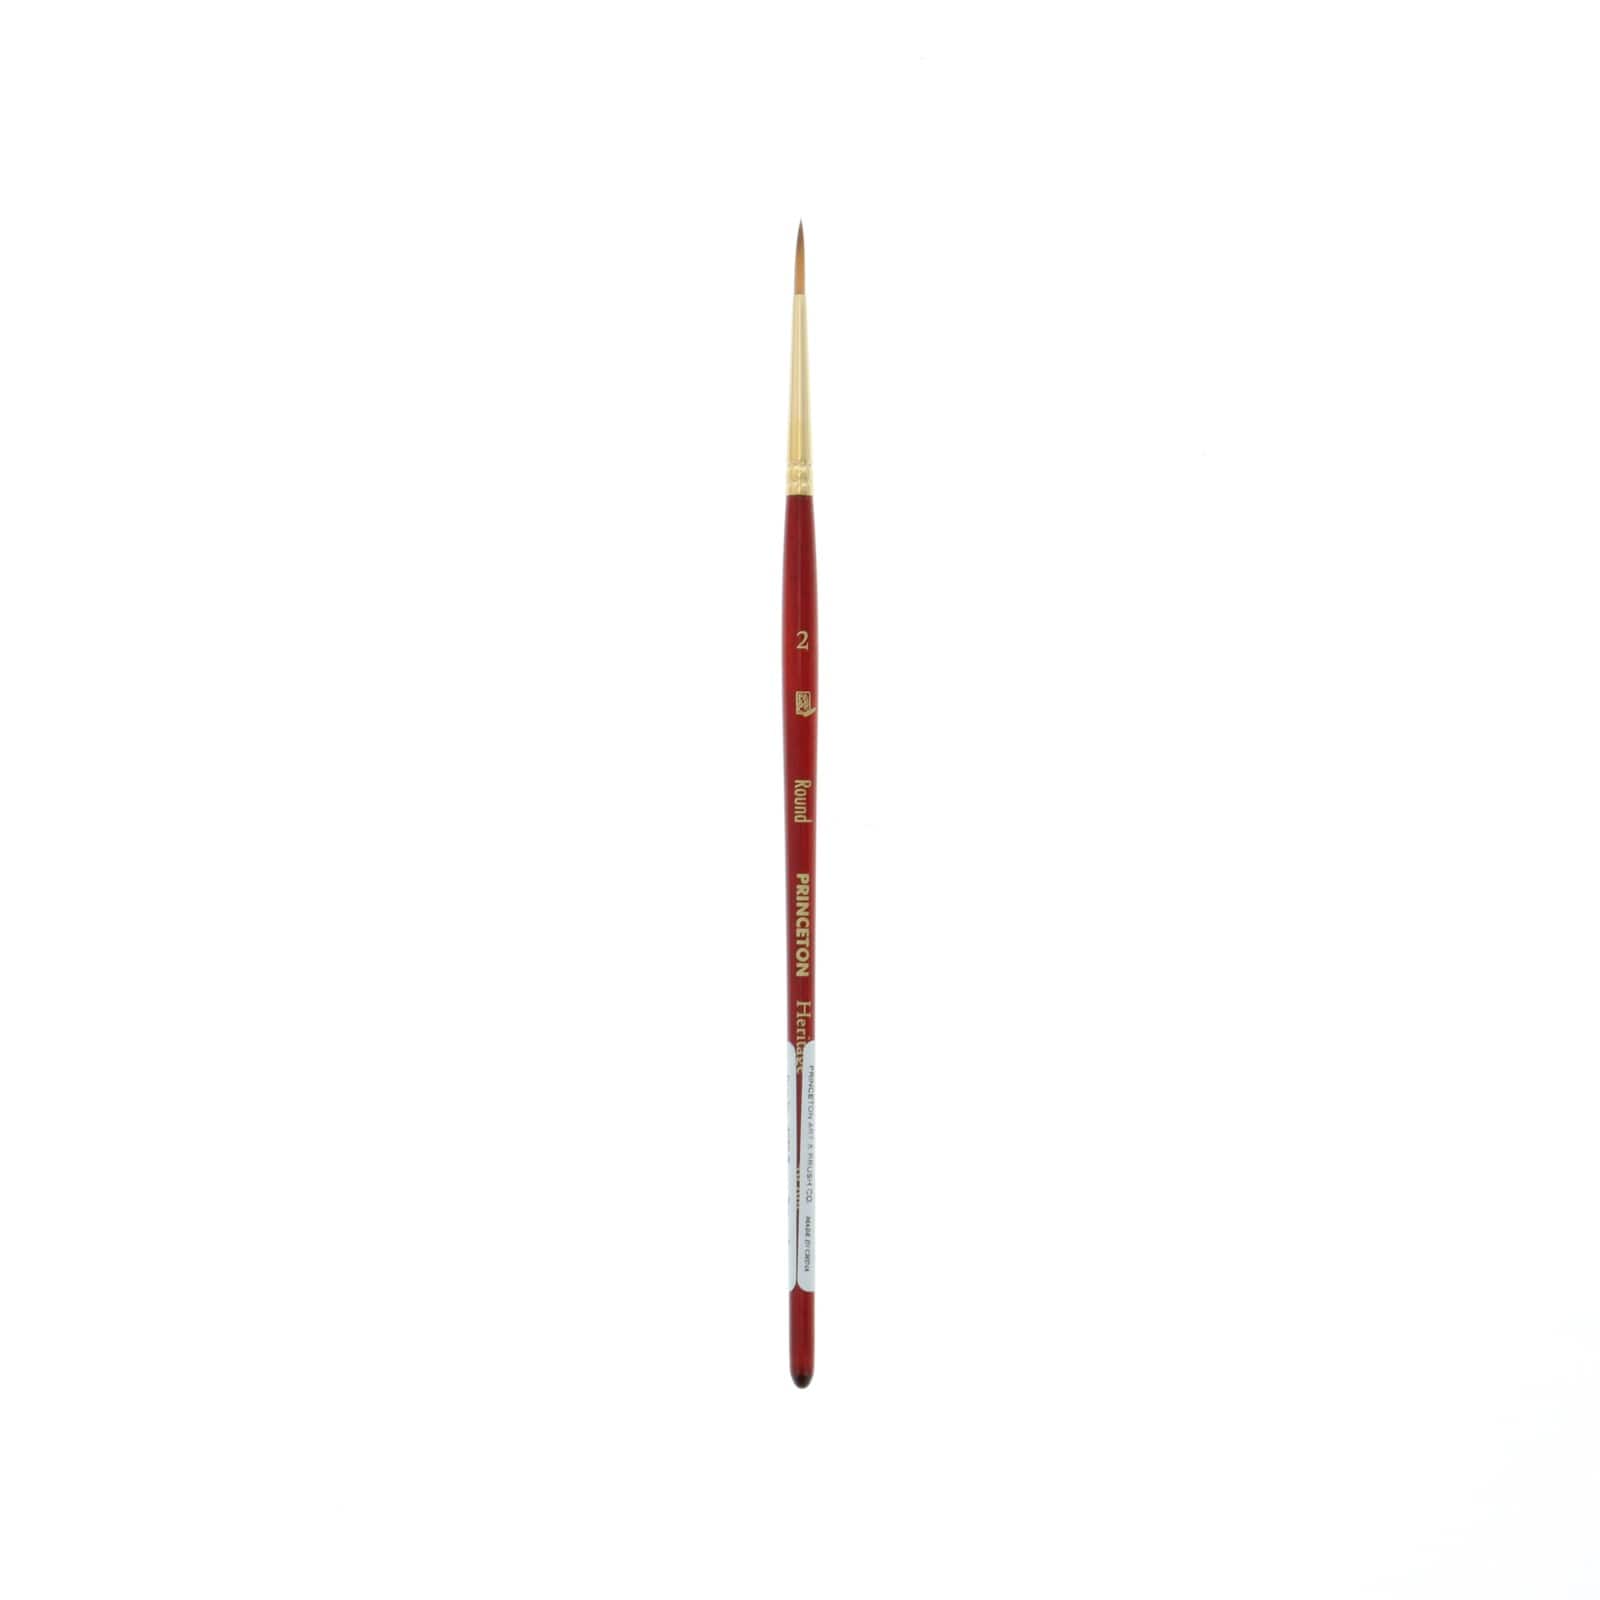 Princeton Synthetic Sable Watercolor Round Brush 2